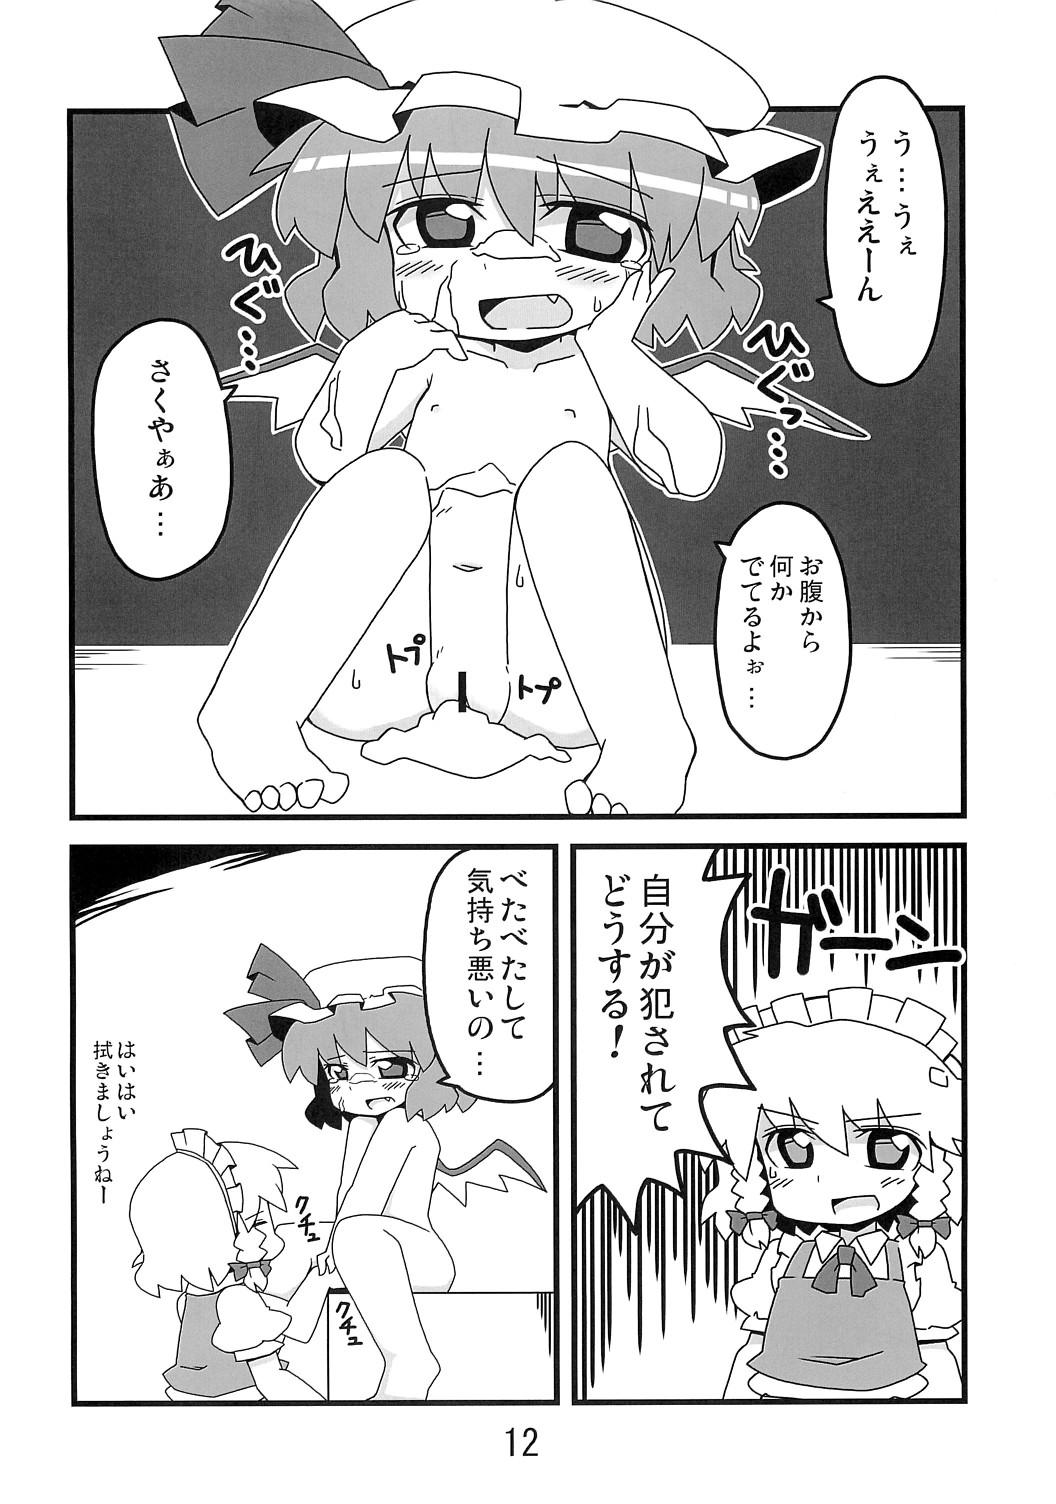 Girls 東方豊年祭 - Touhou project Arabe - Page 11